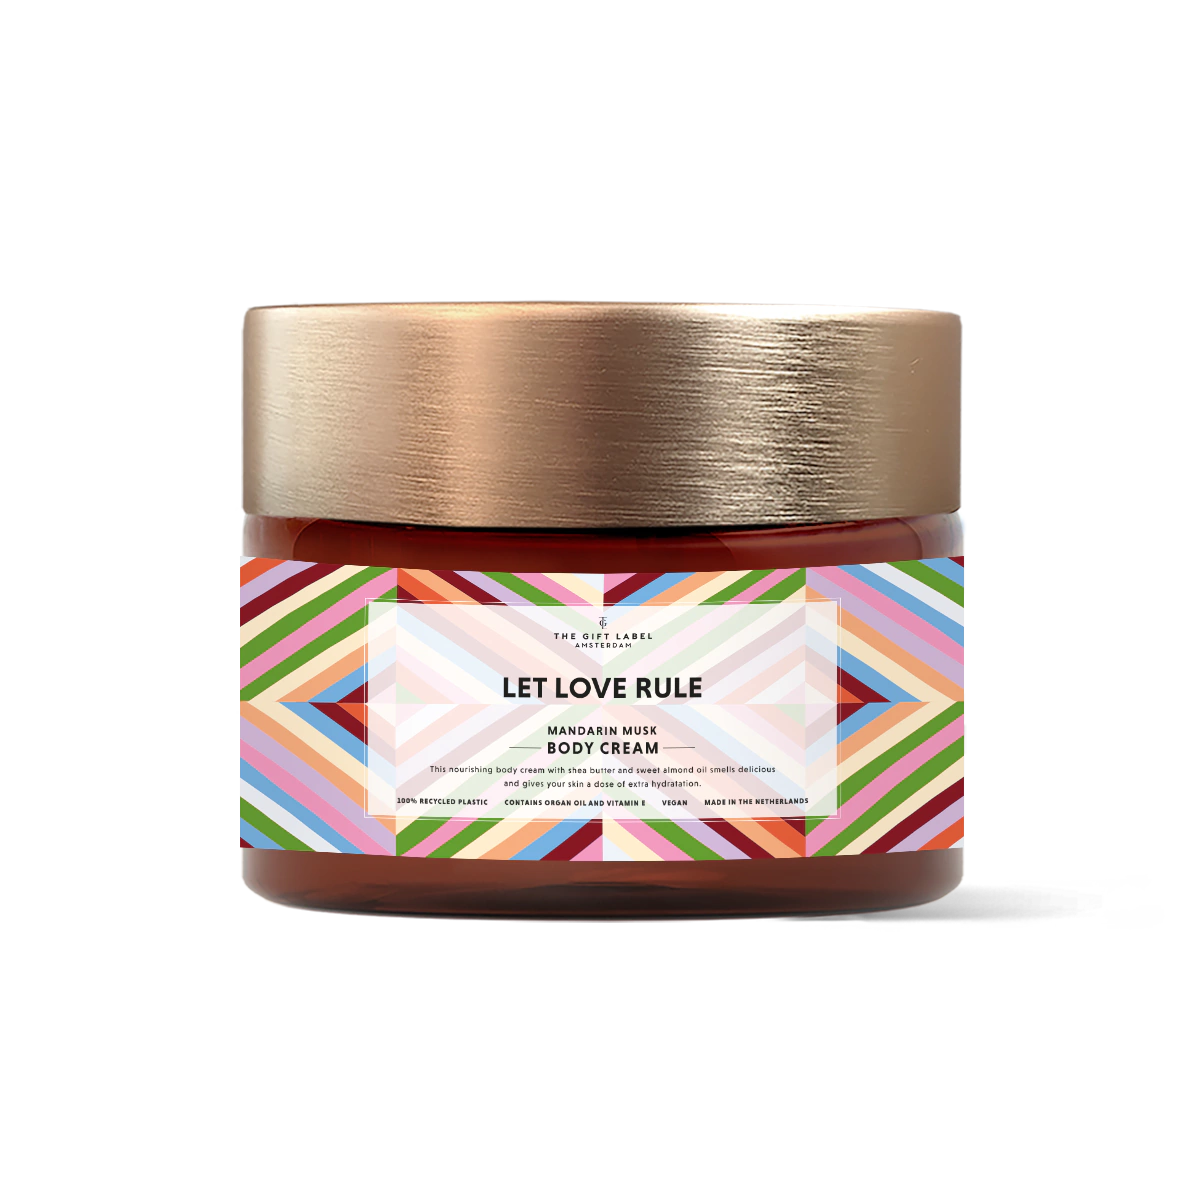 BODYCRÈME LET LOVE RULE THE GIFT LABEL